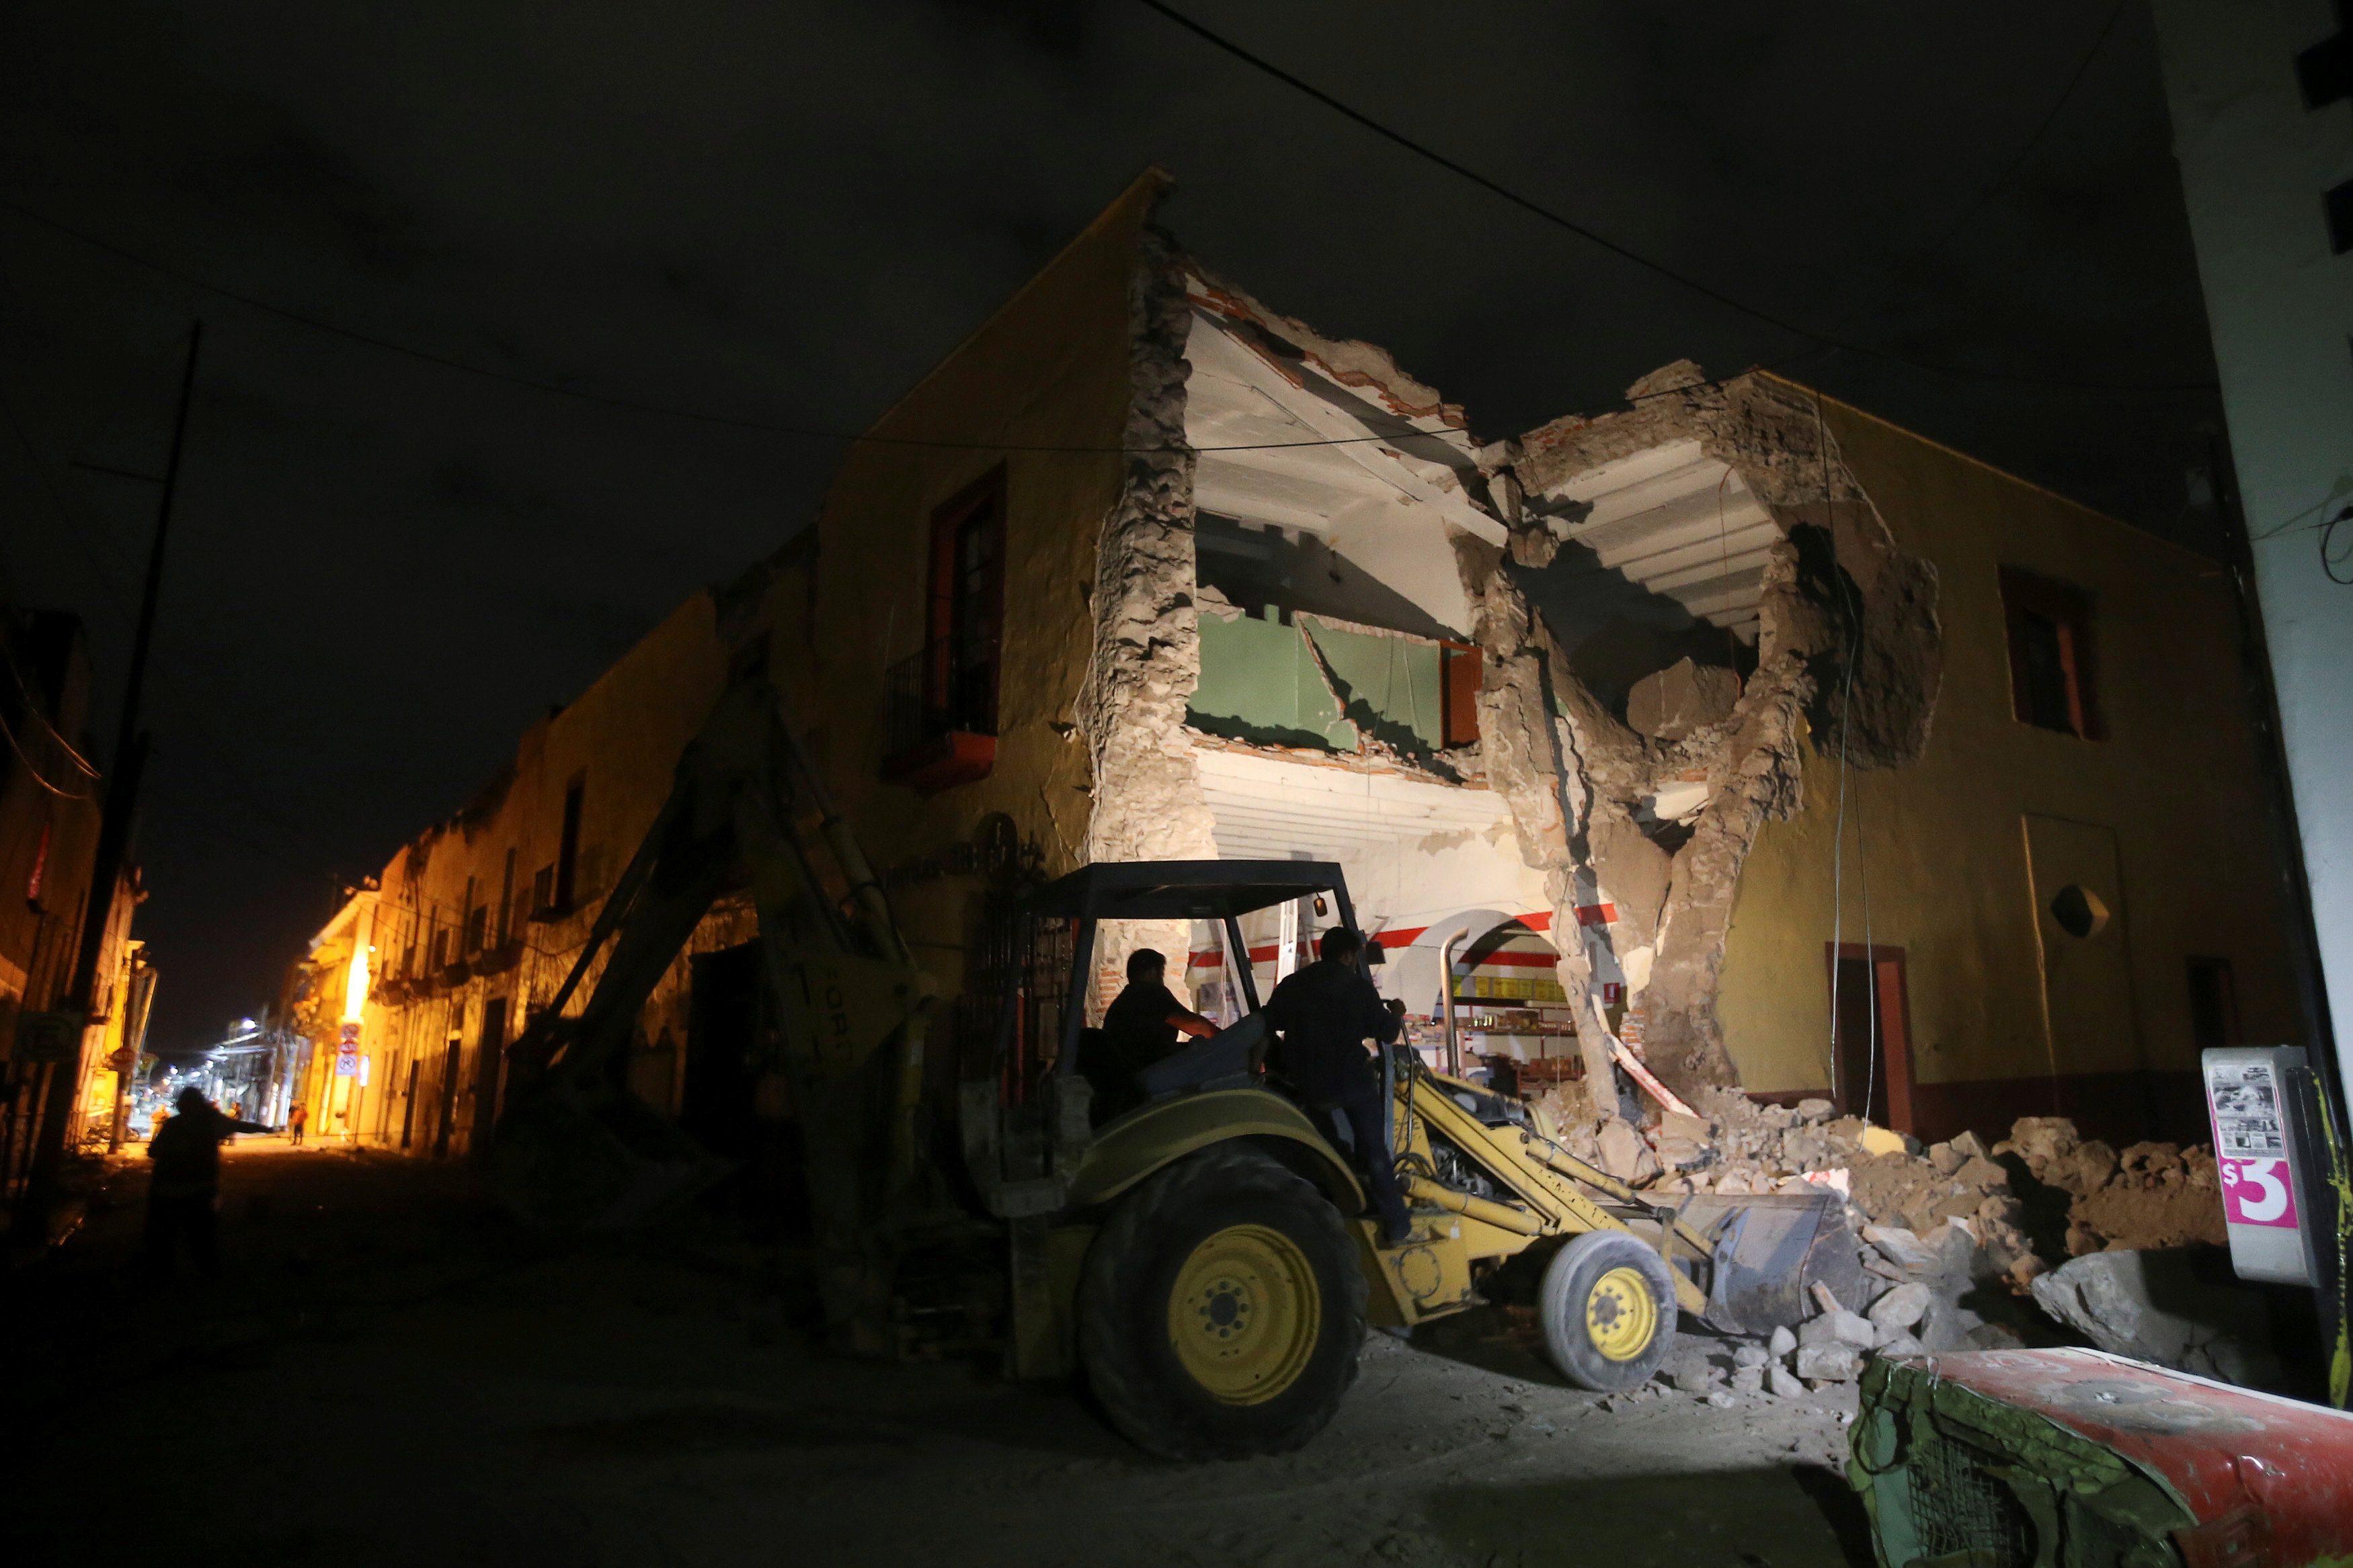 A machine works on a destroyed building after an earthquake hit Atlixco, in Puebla state, Mexico, September 19, 2017. REUTERS/Edgard Garrido